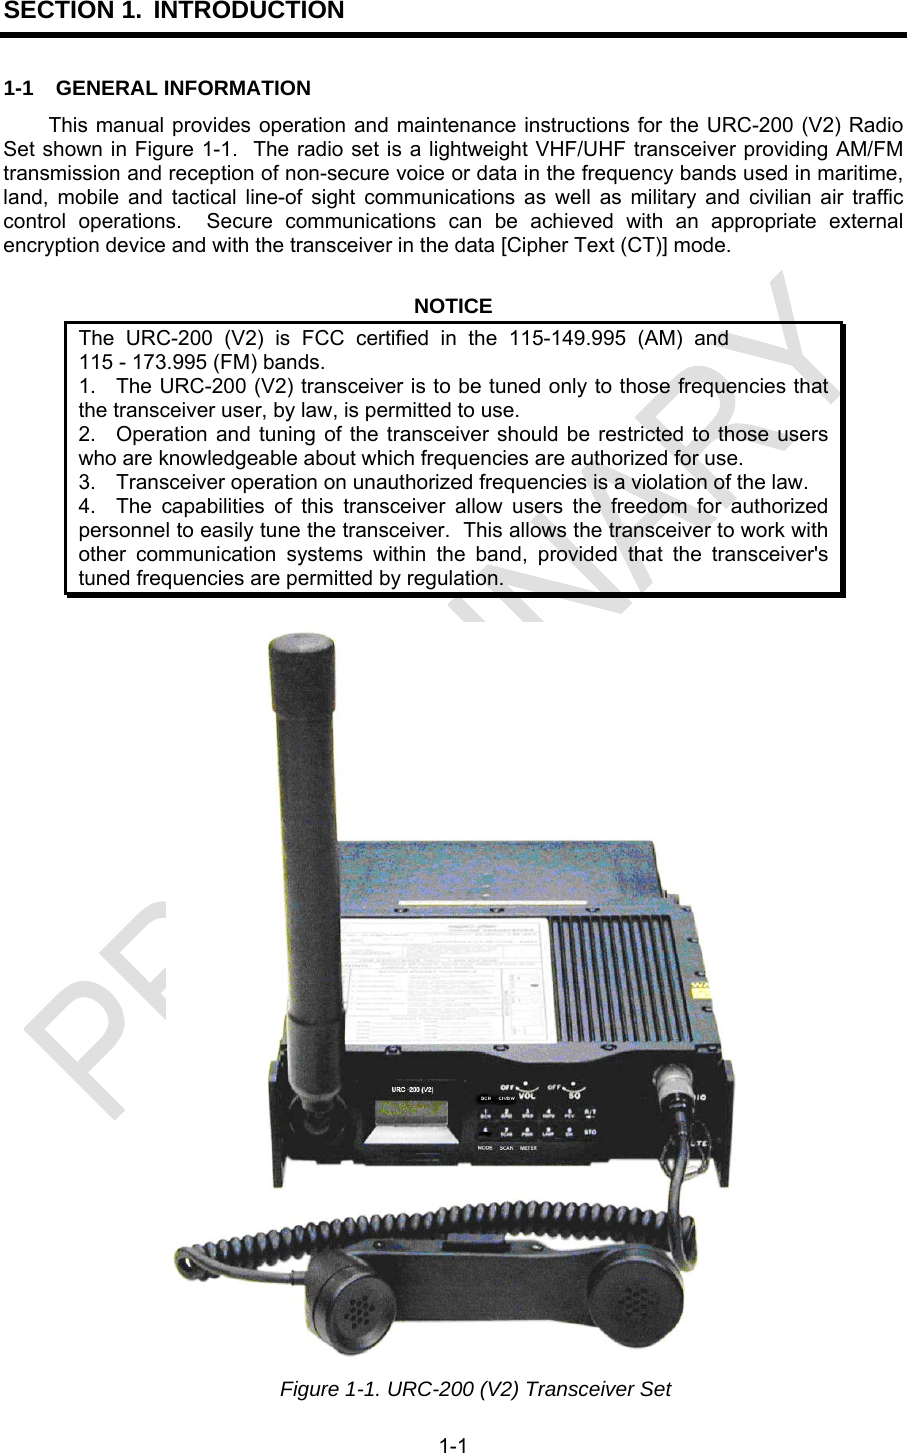  1-1 SECTION 1. INTRODUCTION 1-1 GENERAL INFORMATION This manual provides operation and maintenance instructions for the URC-200 (V2) Radio Set shown in Figure 1-1.  The radio set is a lightweight VHF/UHF transceiver providing AM/FM transmission and reception of non-secure voice or data in the frequency bands used in maritime, land, mobile and tactical line-of sight communications as well as military and civilian air traffic control operations.  Secure communications can be achieved with an appropriate external encryption device and with the transceiver in the data [Cipher Text (CT)] mode.  NOTICE The URC-200 (V2) is FCC certified in the 115-149.995 (AM) and115 - 173.995 (FM) bands. 1.  The URC-200 (V2) transceiver is to be tuned only to those frequencies that the transceiver user, by law, is permitted to use. 2.  Operation and tuning of the transceiver should be restricted to those users who are knowledgeable about which frequencies are authorized for use. 3.  Transceiver operation on unauthorized frequencies is a violation of the law. 4.  The capabilities of this transceiver allow users the freedom for authorized personnel to easily tune the transceiver.  This allows the transceiver to work with other communication systems within the band, provided that the transceiver&apos;s tuned frequencies are permitted by regulation.   Figure 1-1. URC-200 (V2) Transceiver Set 